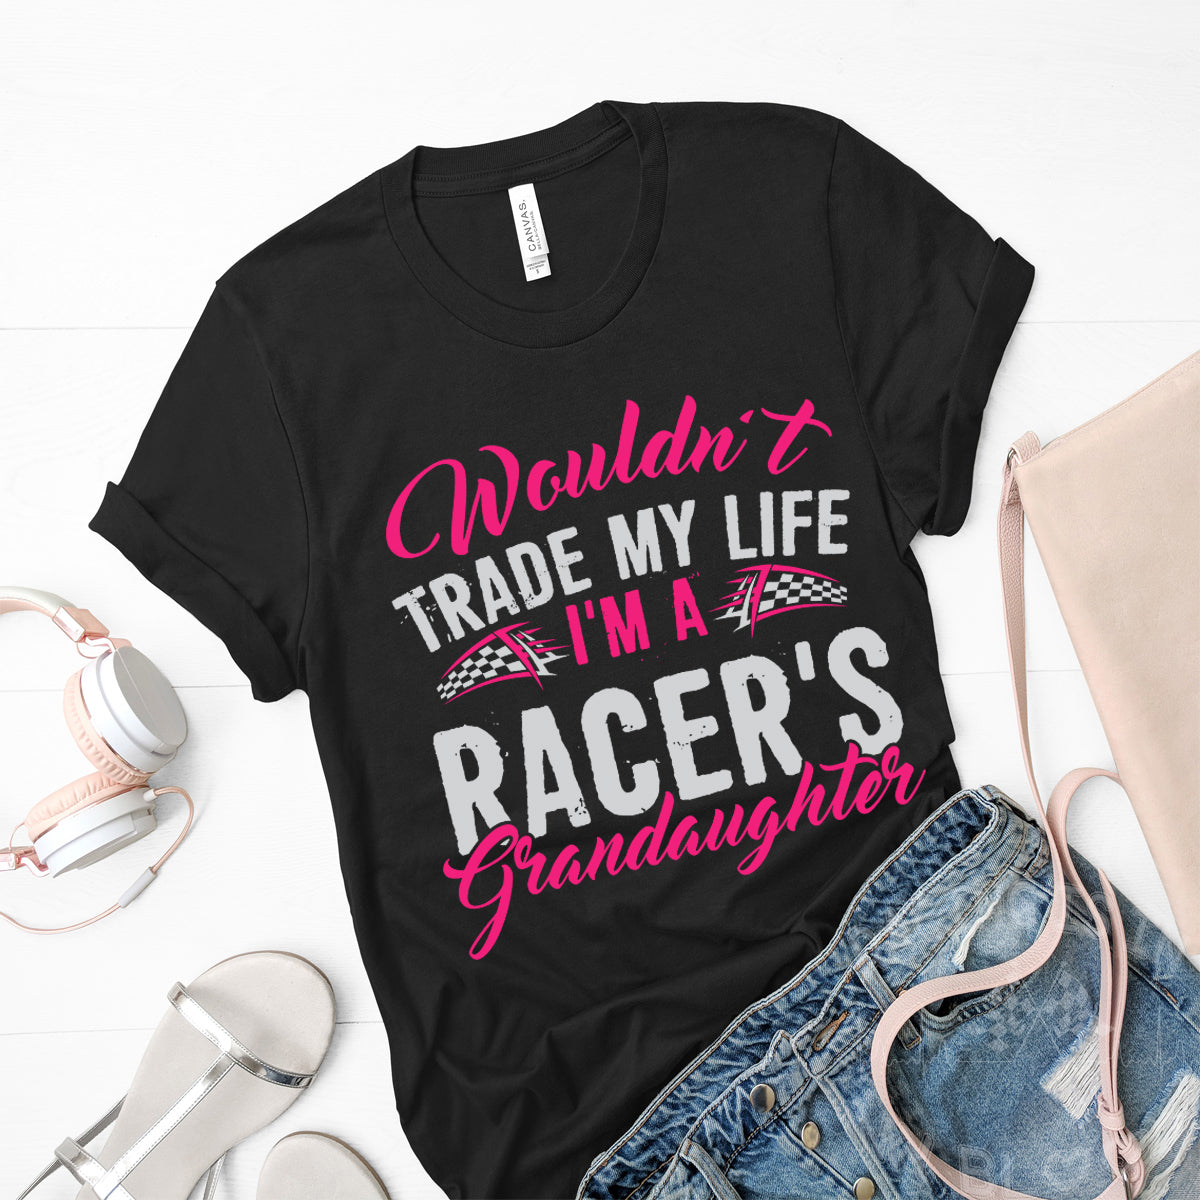 Wouldn't Trade My Life I'm A Racer's Granddaughter T-Shirts!